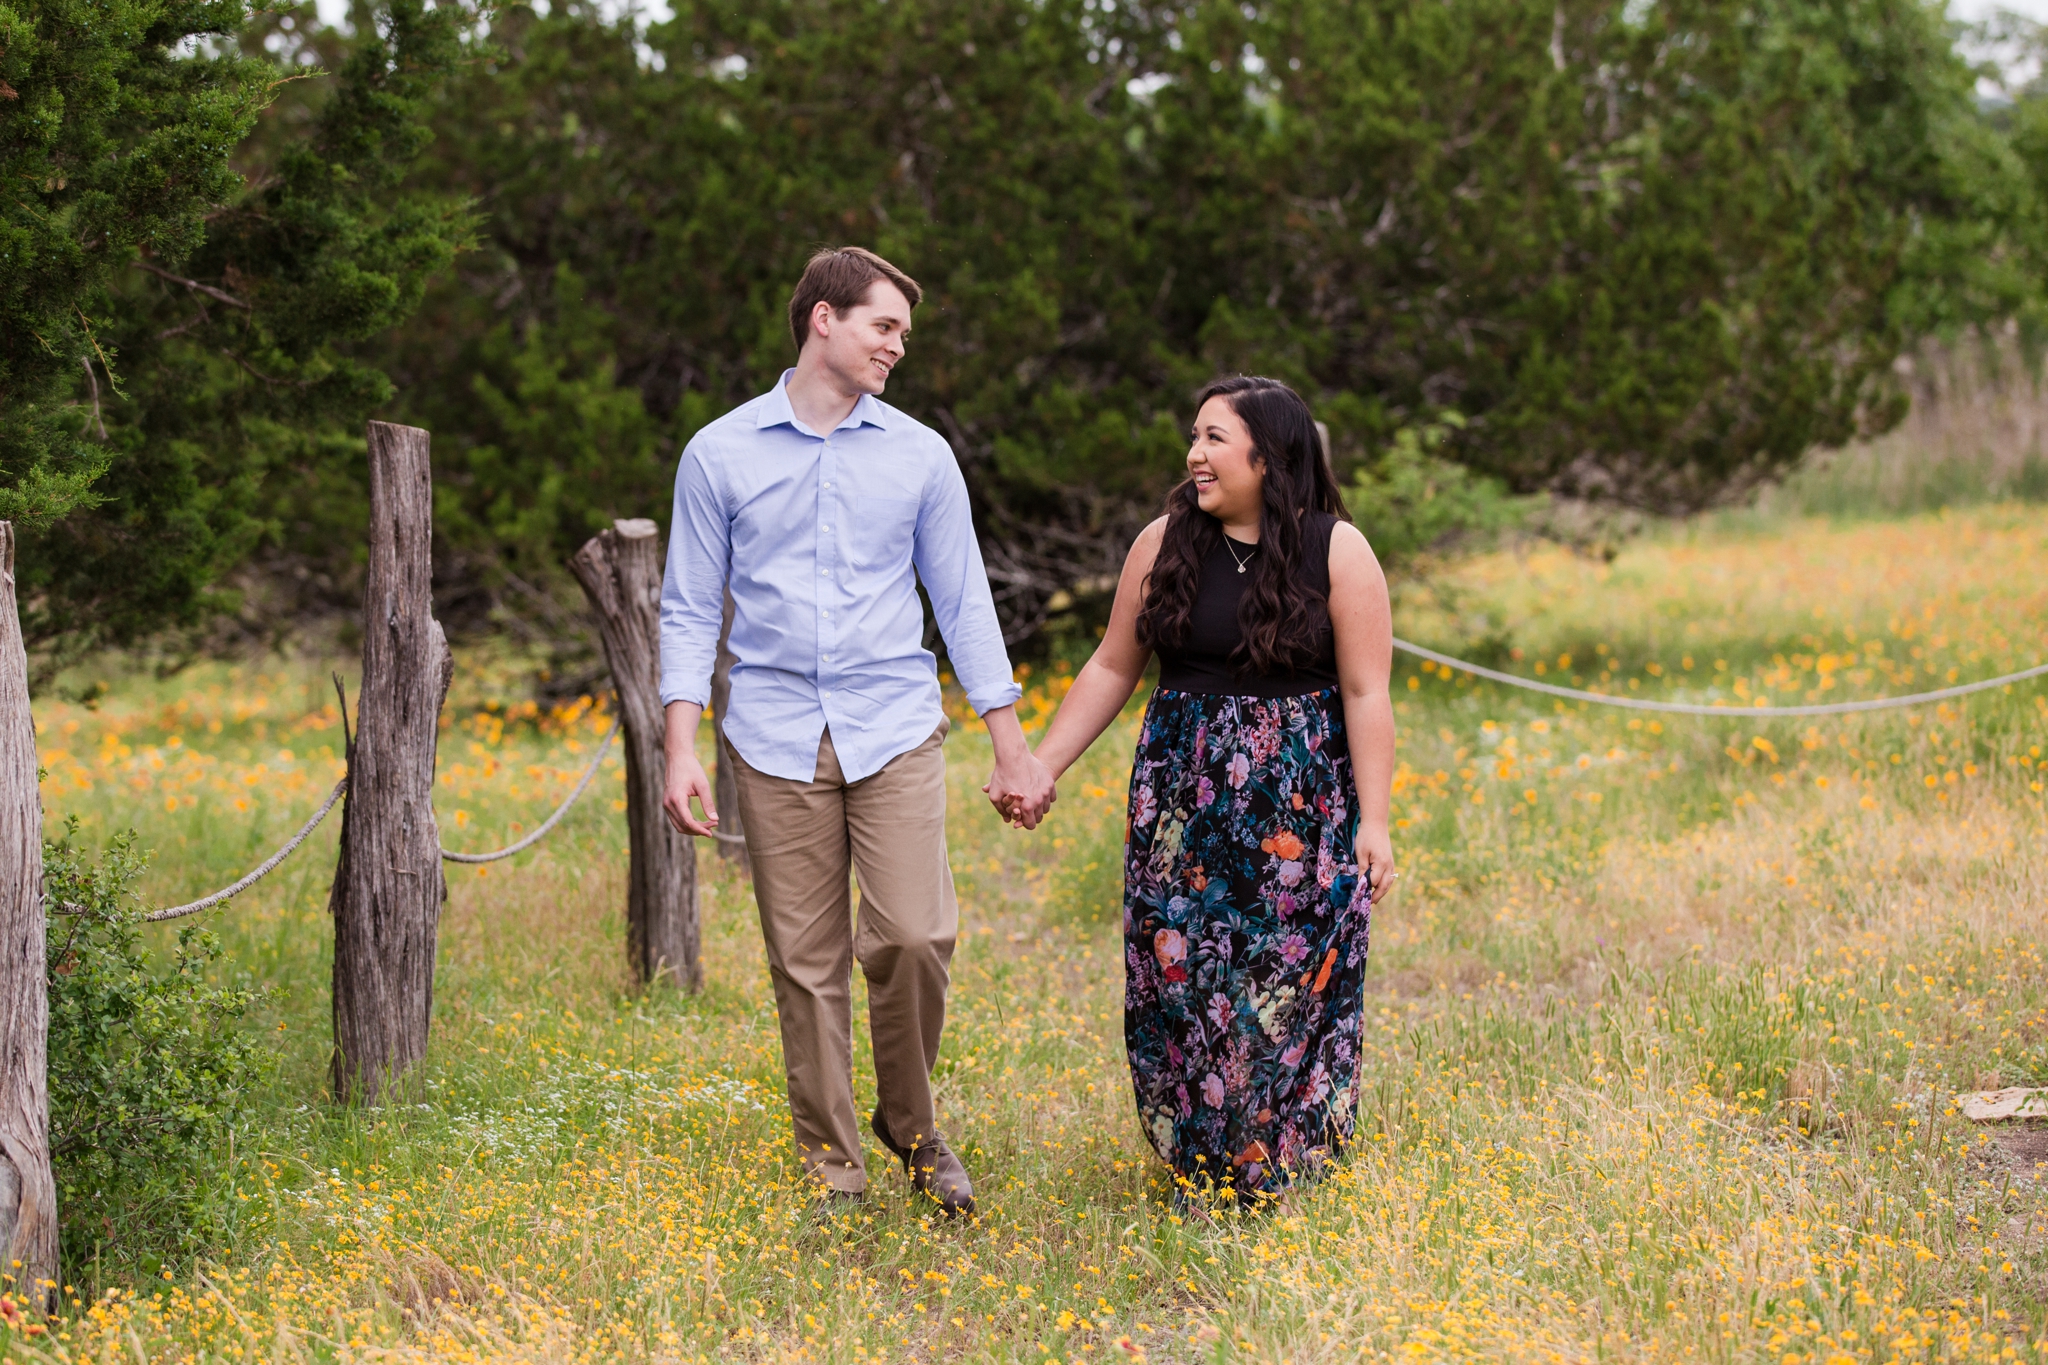 Spring Engagement Session filled with Wildflowers in San Antonio, TX by Dawn Elizabeth Studios